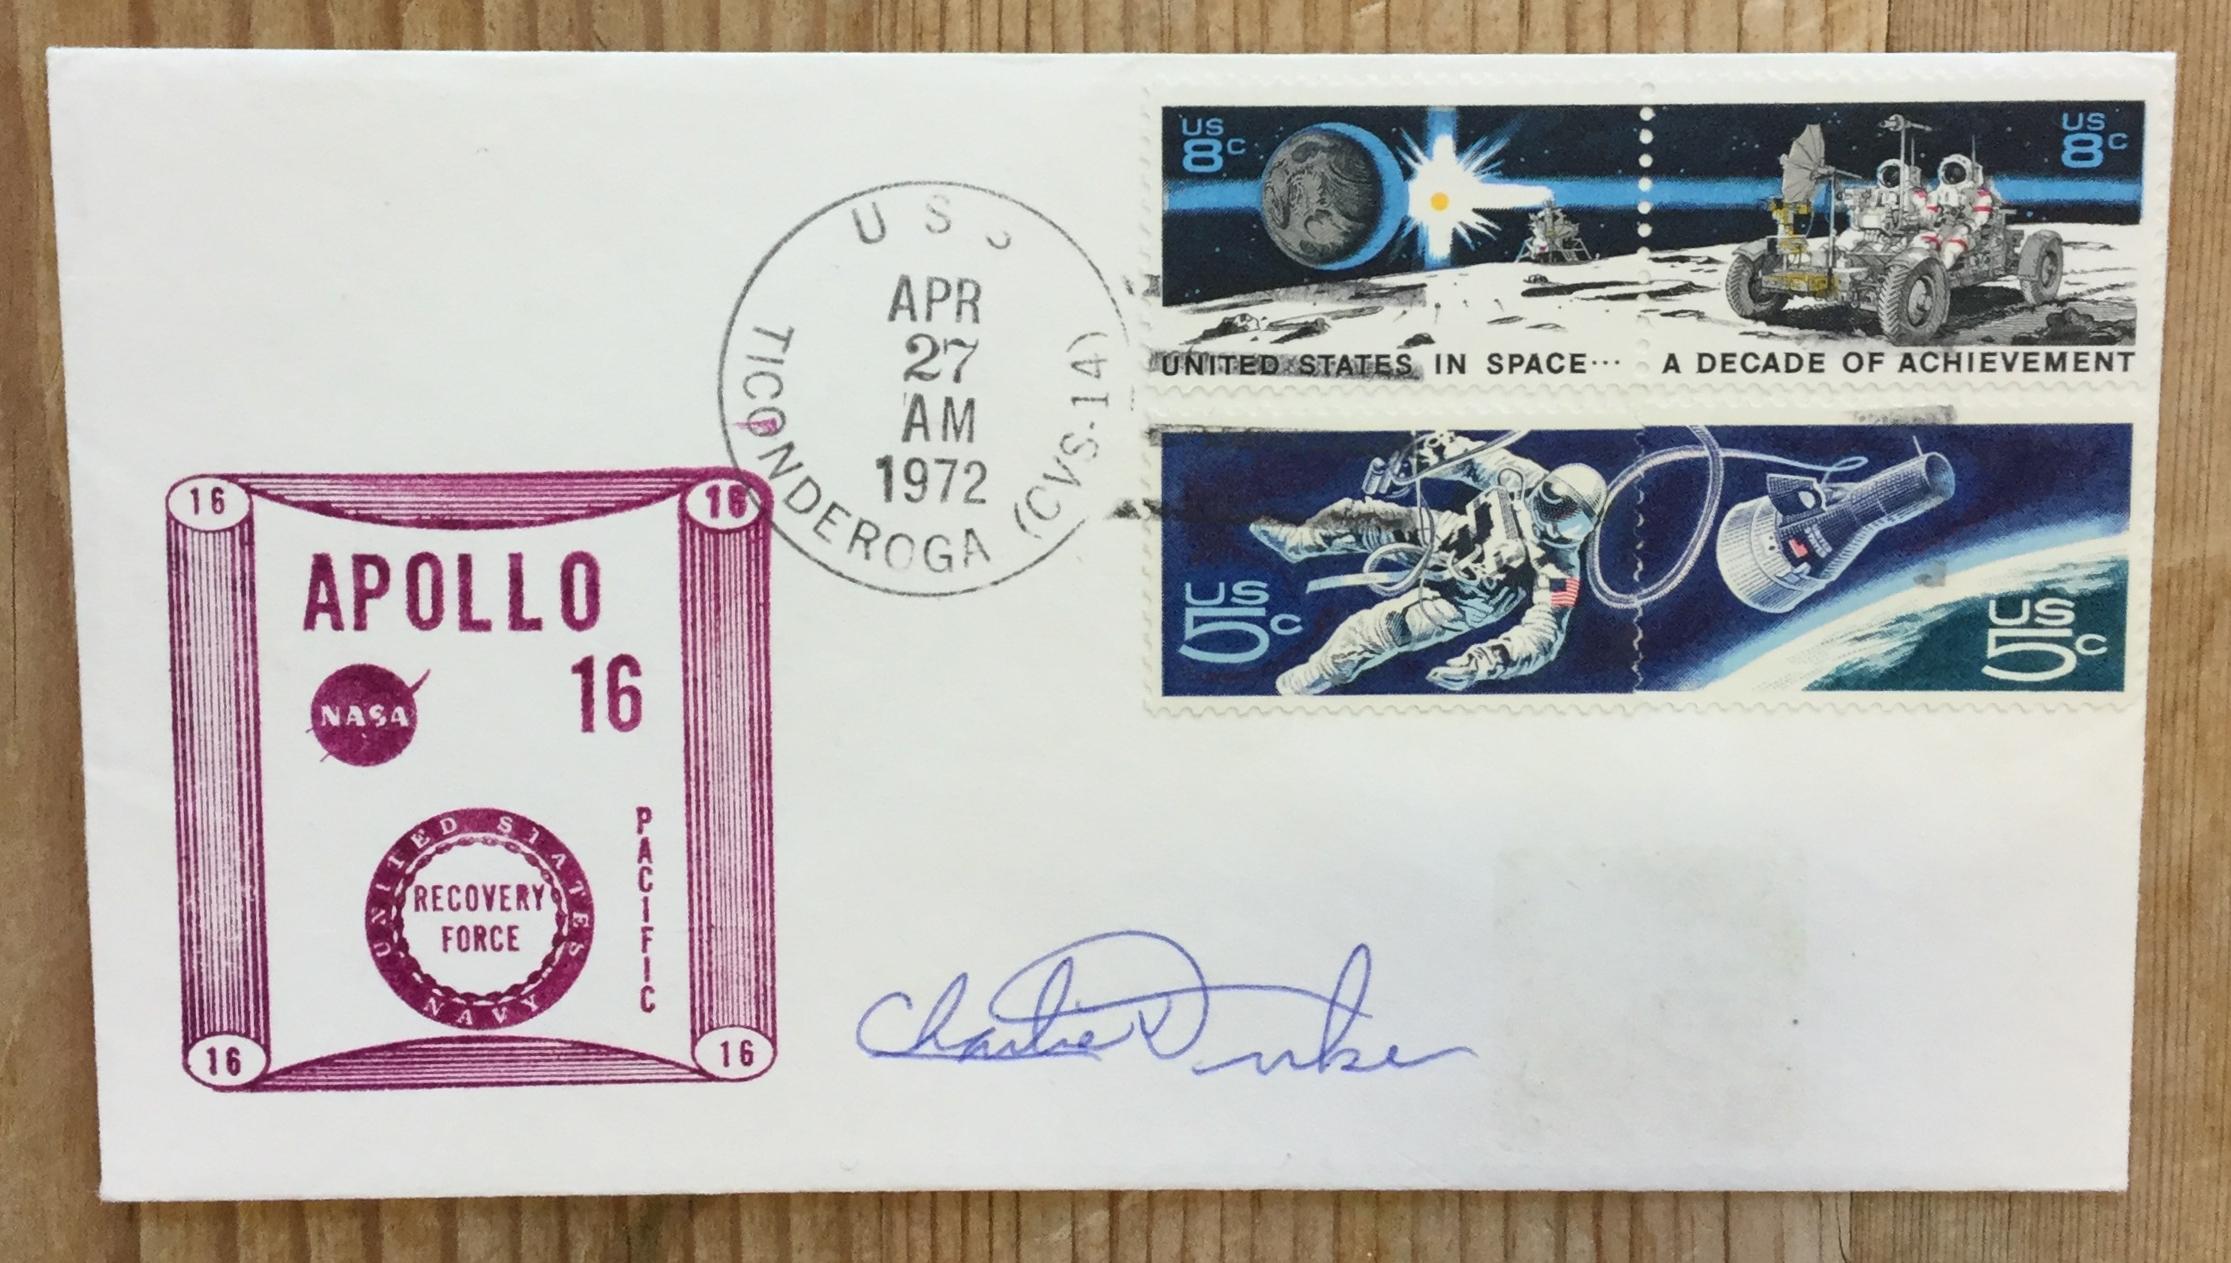 A Charlie Duke signed Apollo 16 recovery postal cover
Apollo 16 lunar module pilot Charlie Duke (1935-) is the 10th man to walk on the Moon and also the youngest, at 36 years and 201 days.

Signed attractively by Duke on the front in blue ink.